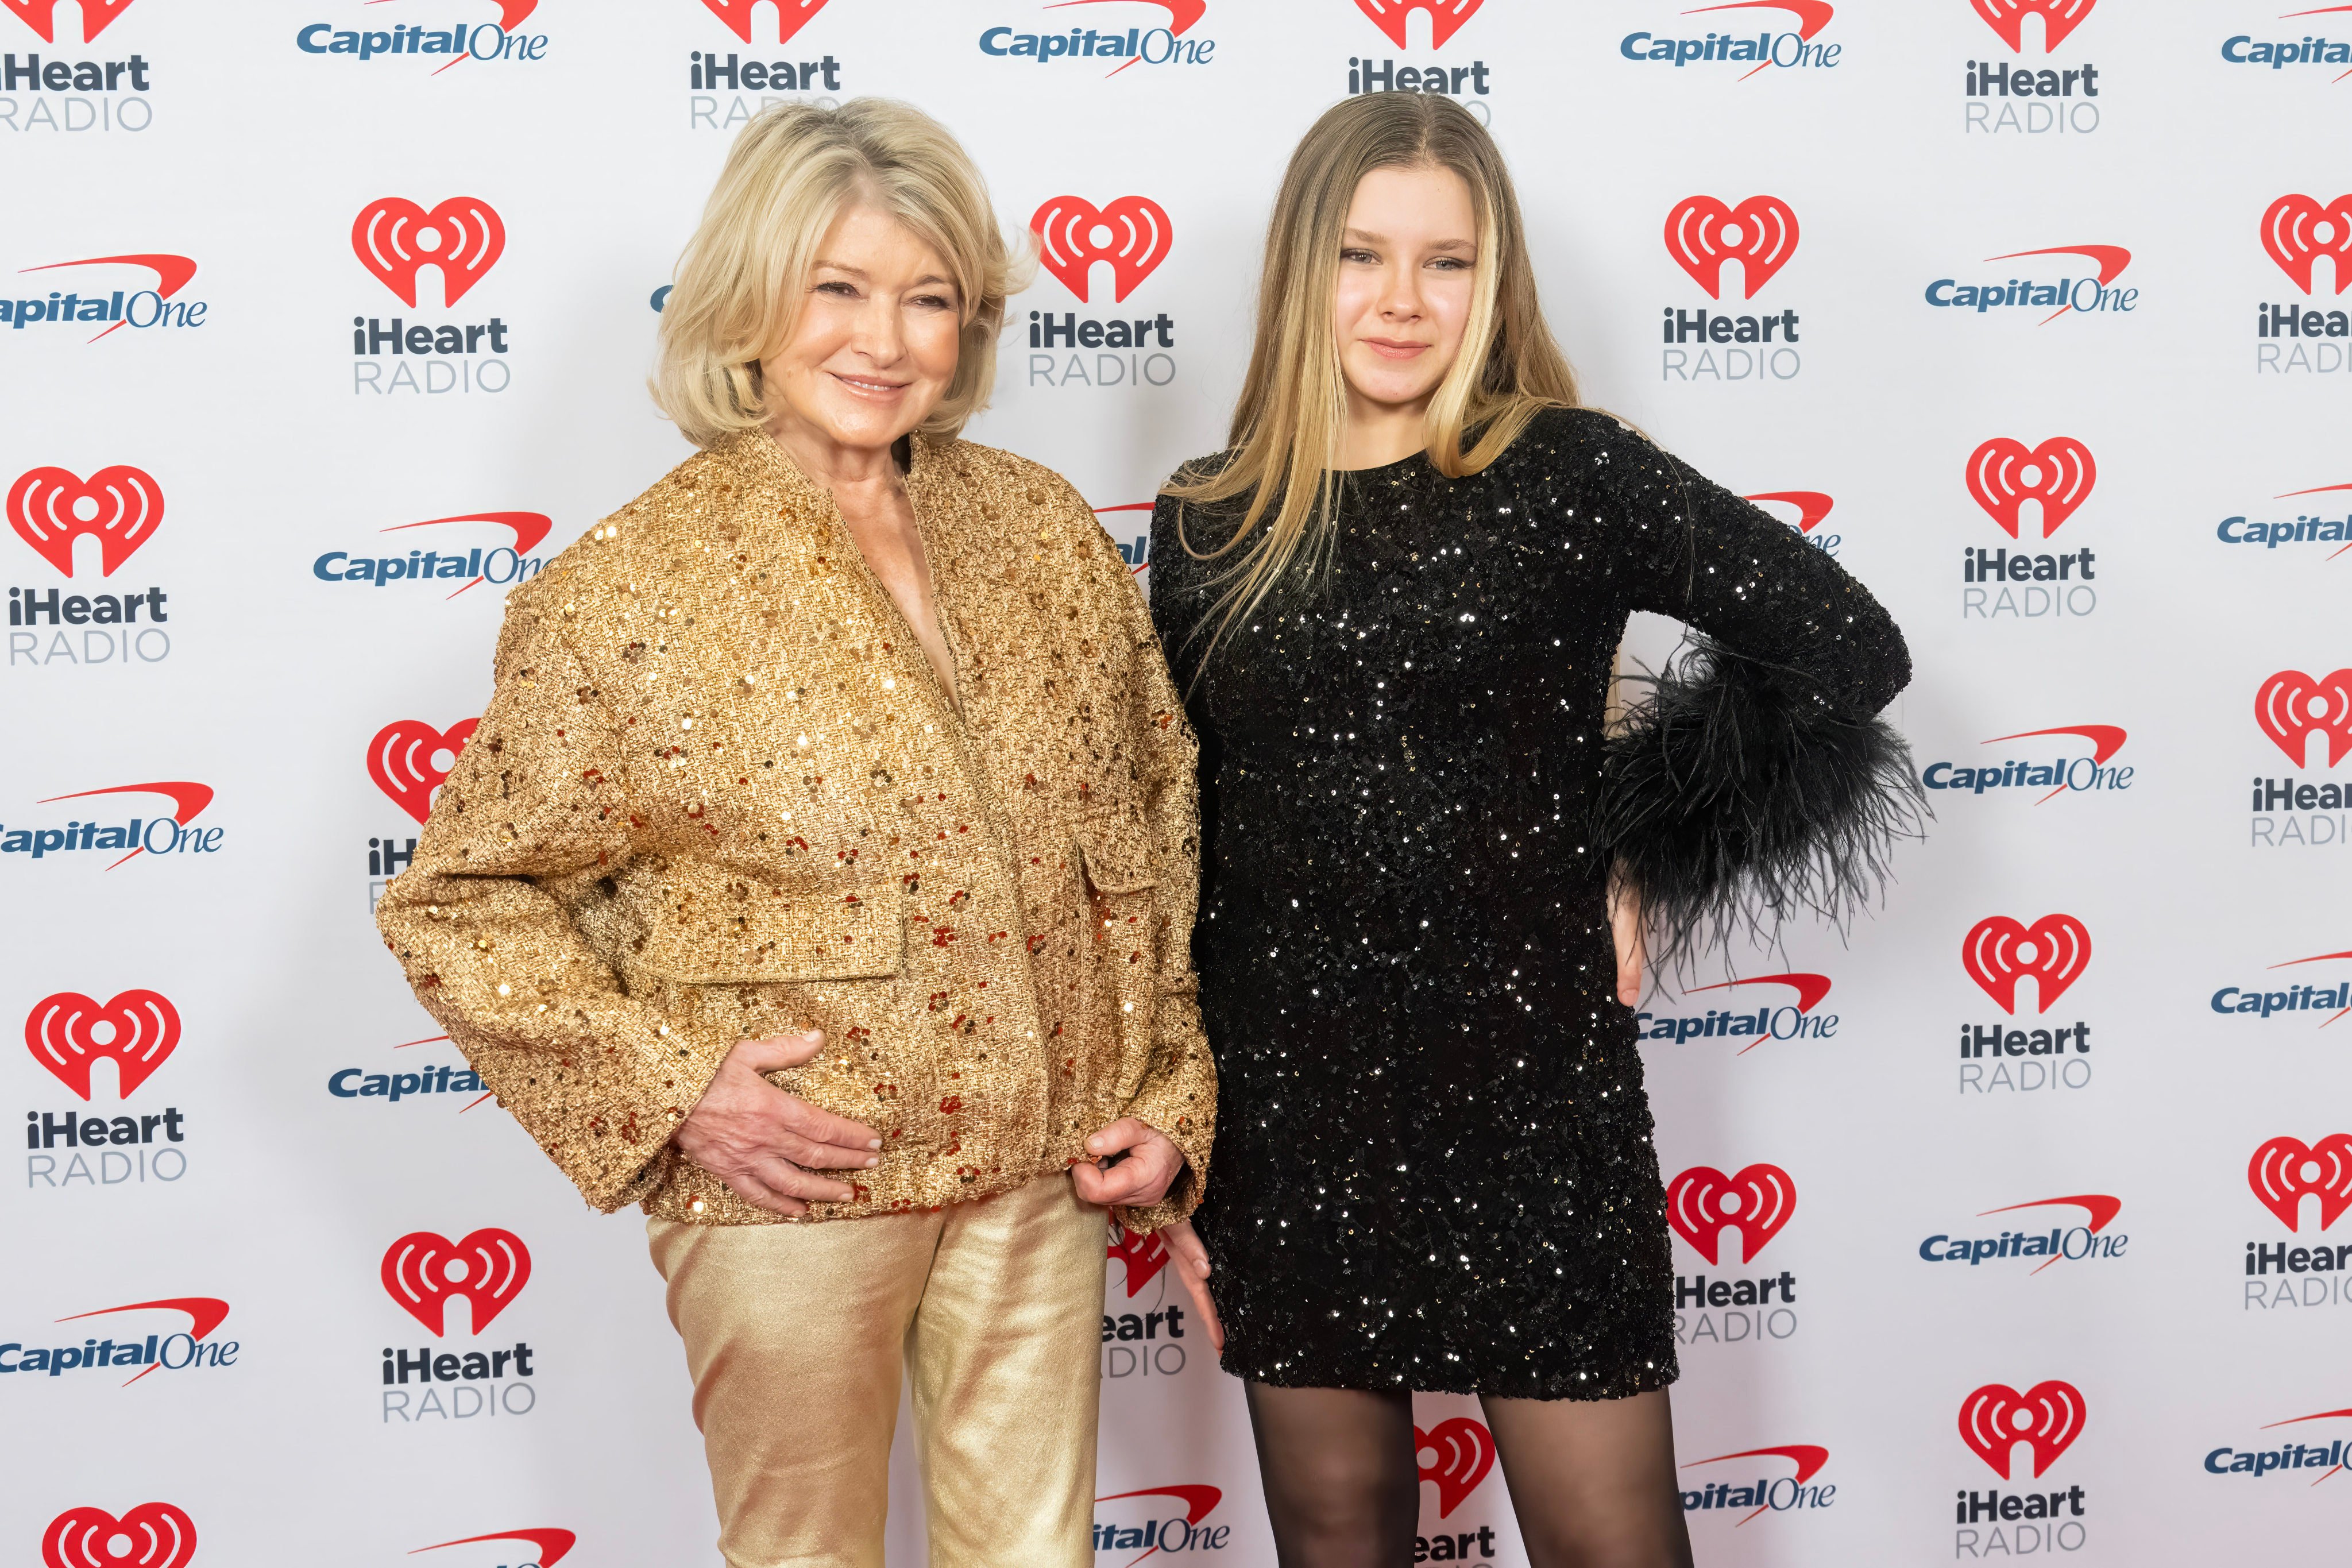 Martha Stewart and Jude Stewart sparkle side by side at iHeartRadio Jingle Ball. Photo: WireImage